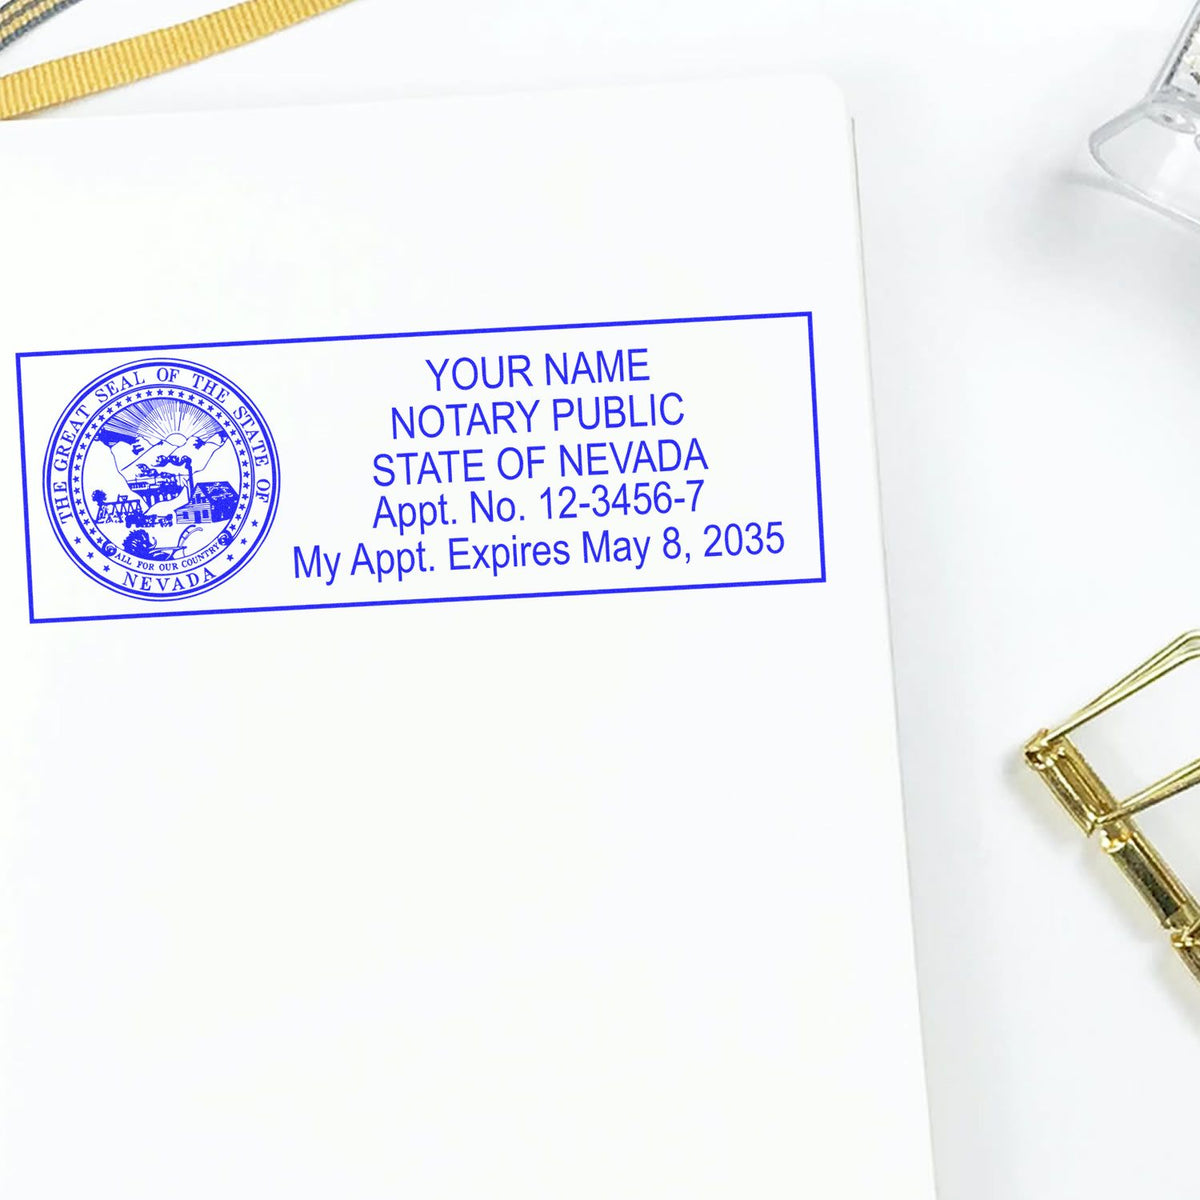 A lifestyle photo showing a stamped image of the Wooden Handle Nevada State Seal Notary Public Stamp on a piece of paper